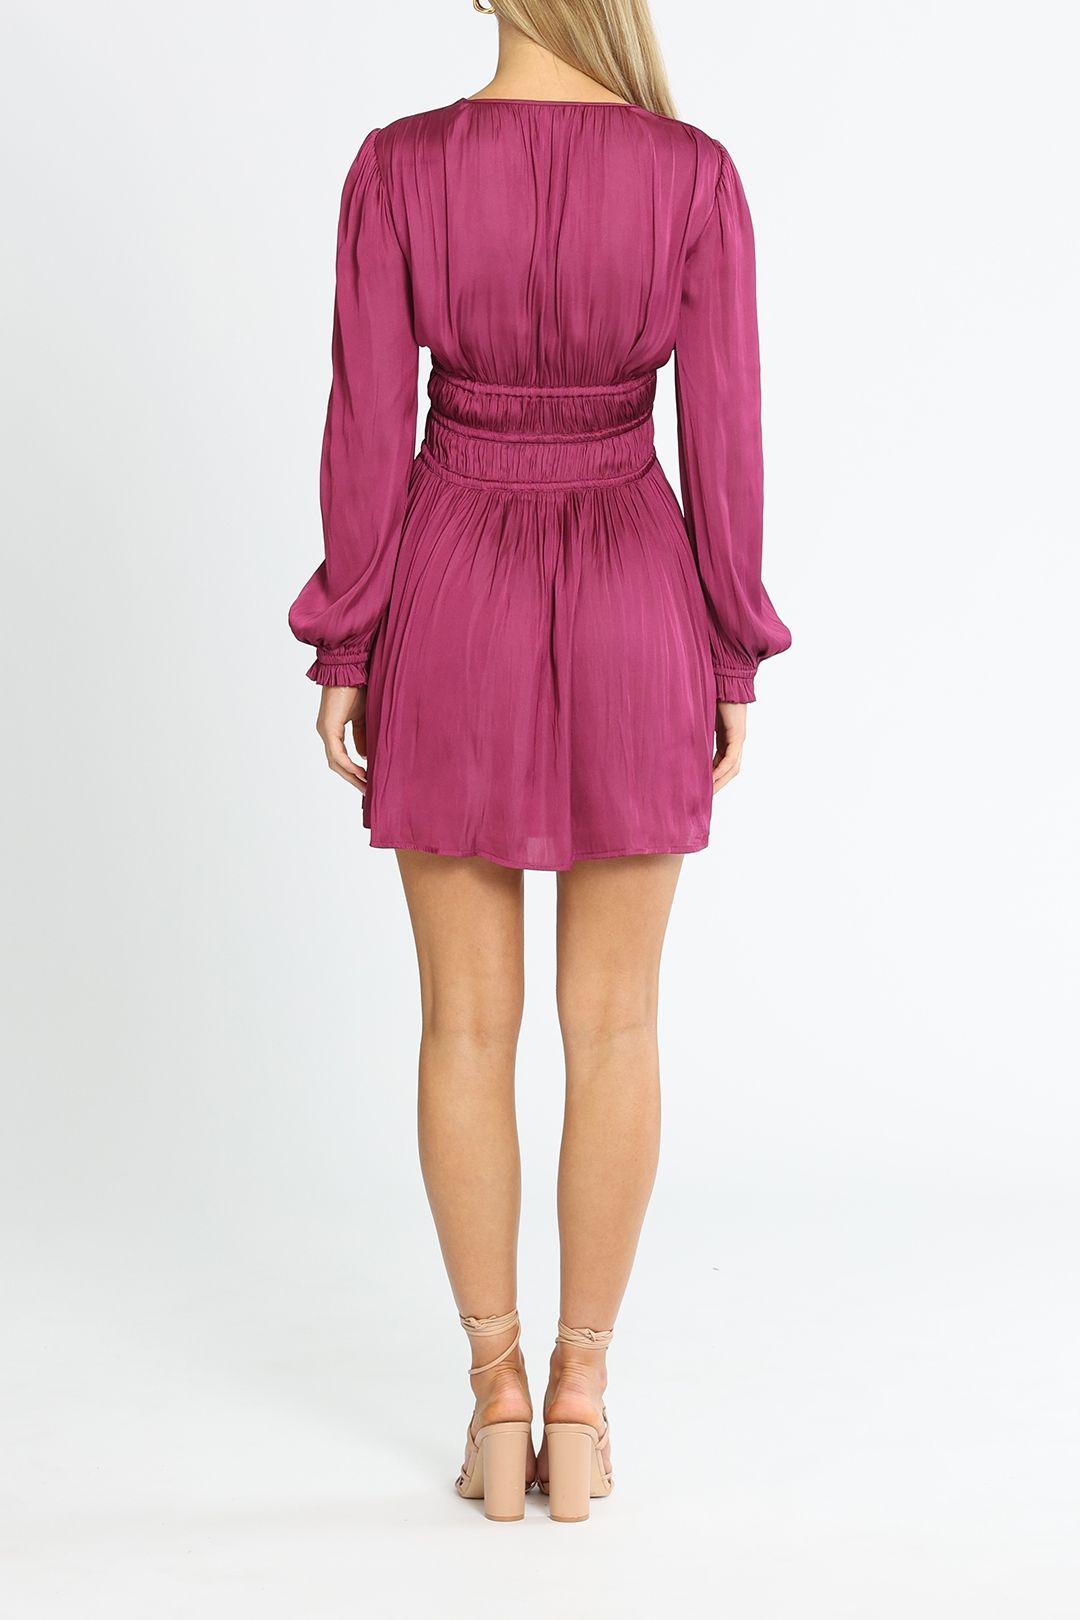 Belle and Bloom Shine Bright Ruched Dress Burgundy Mini